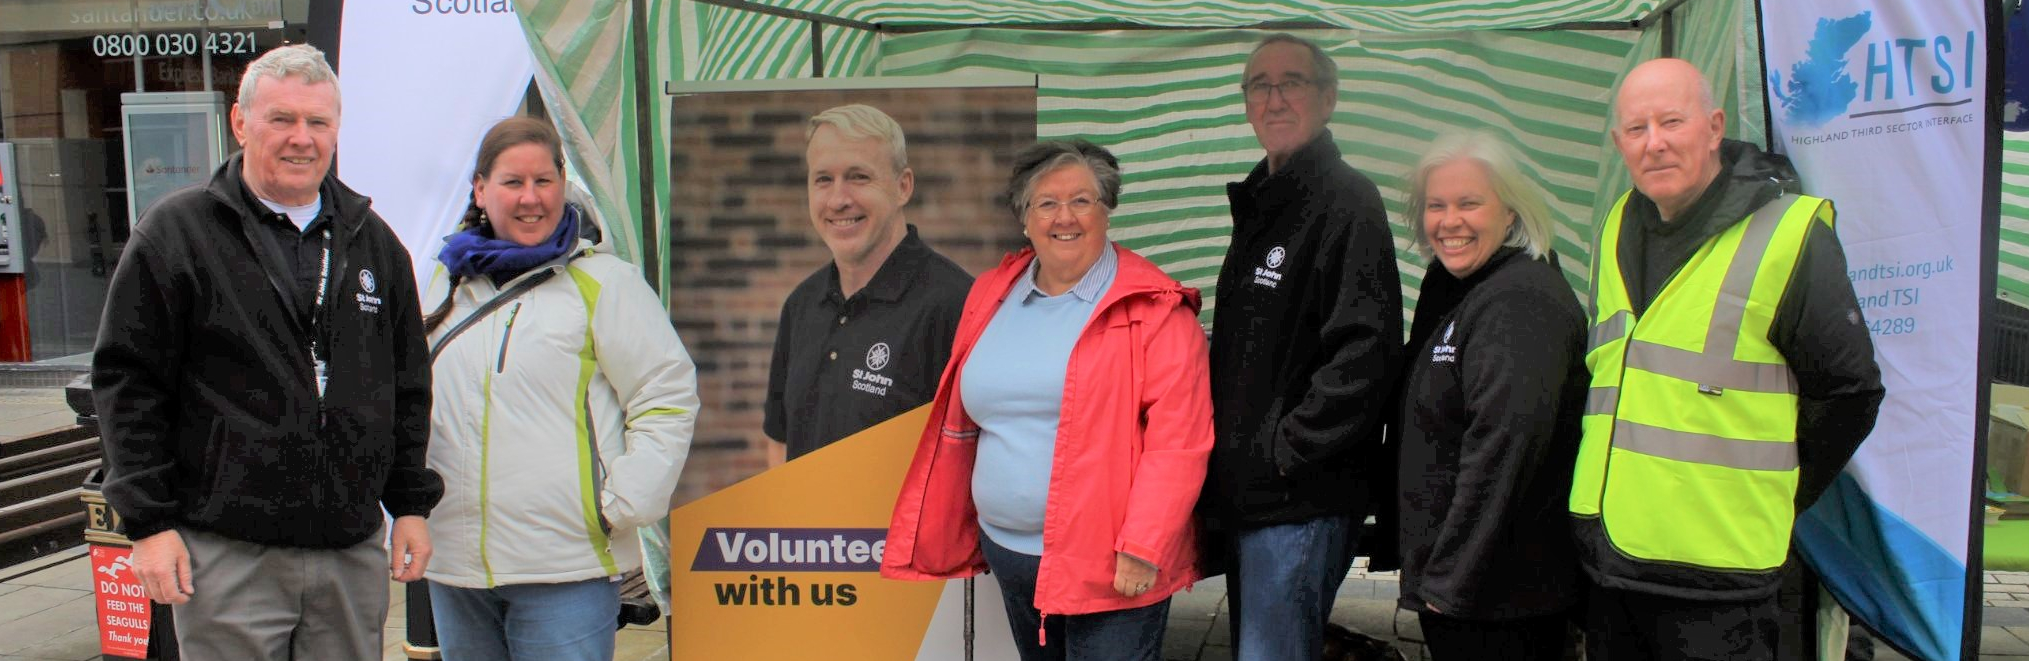 A group of six volunteers pose in front of a pop up banner and stand